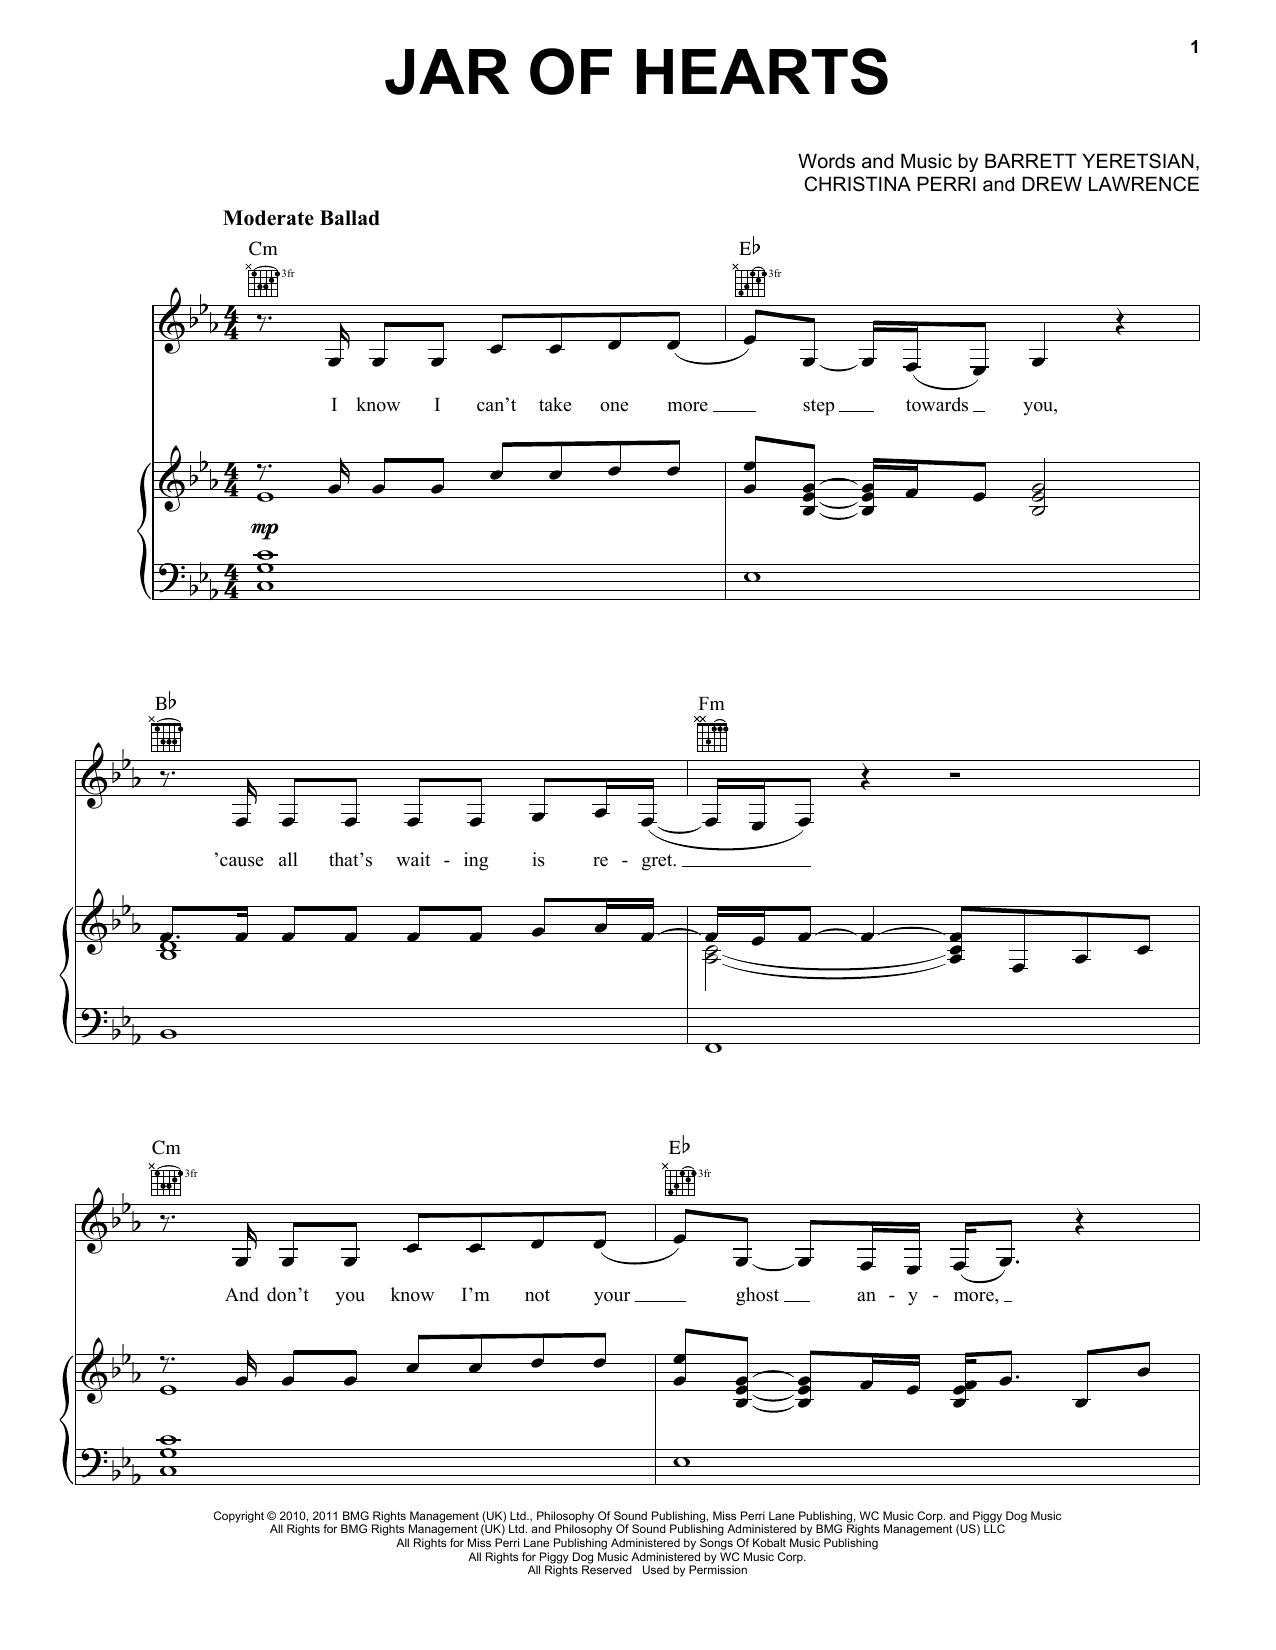 Christina Perri Jar Of Hearts sheet music preview music notes and score for Piano, Vocal & Guitar (Right-Hand Melody) including 8 page(s)